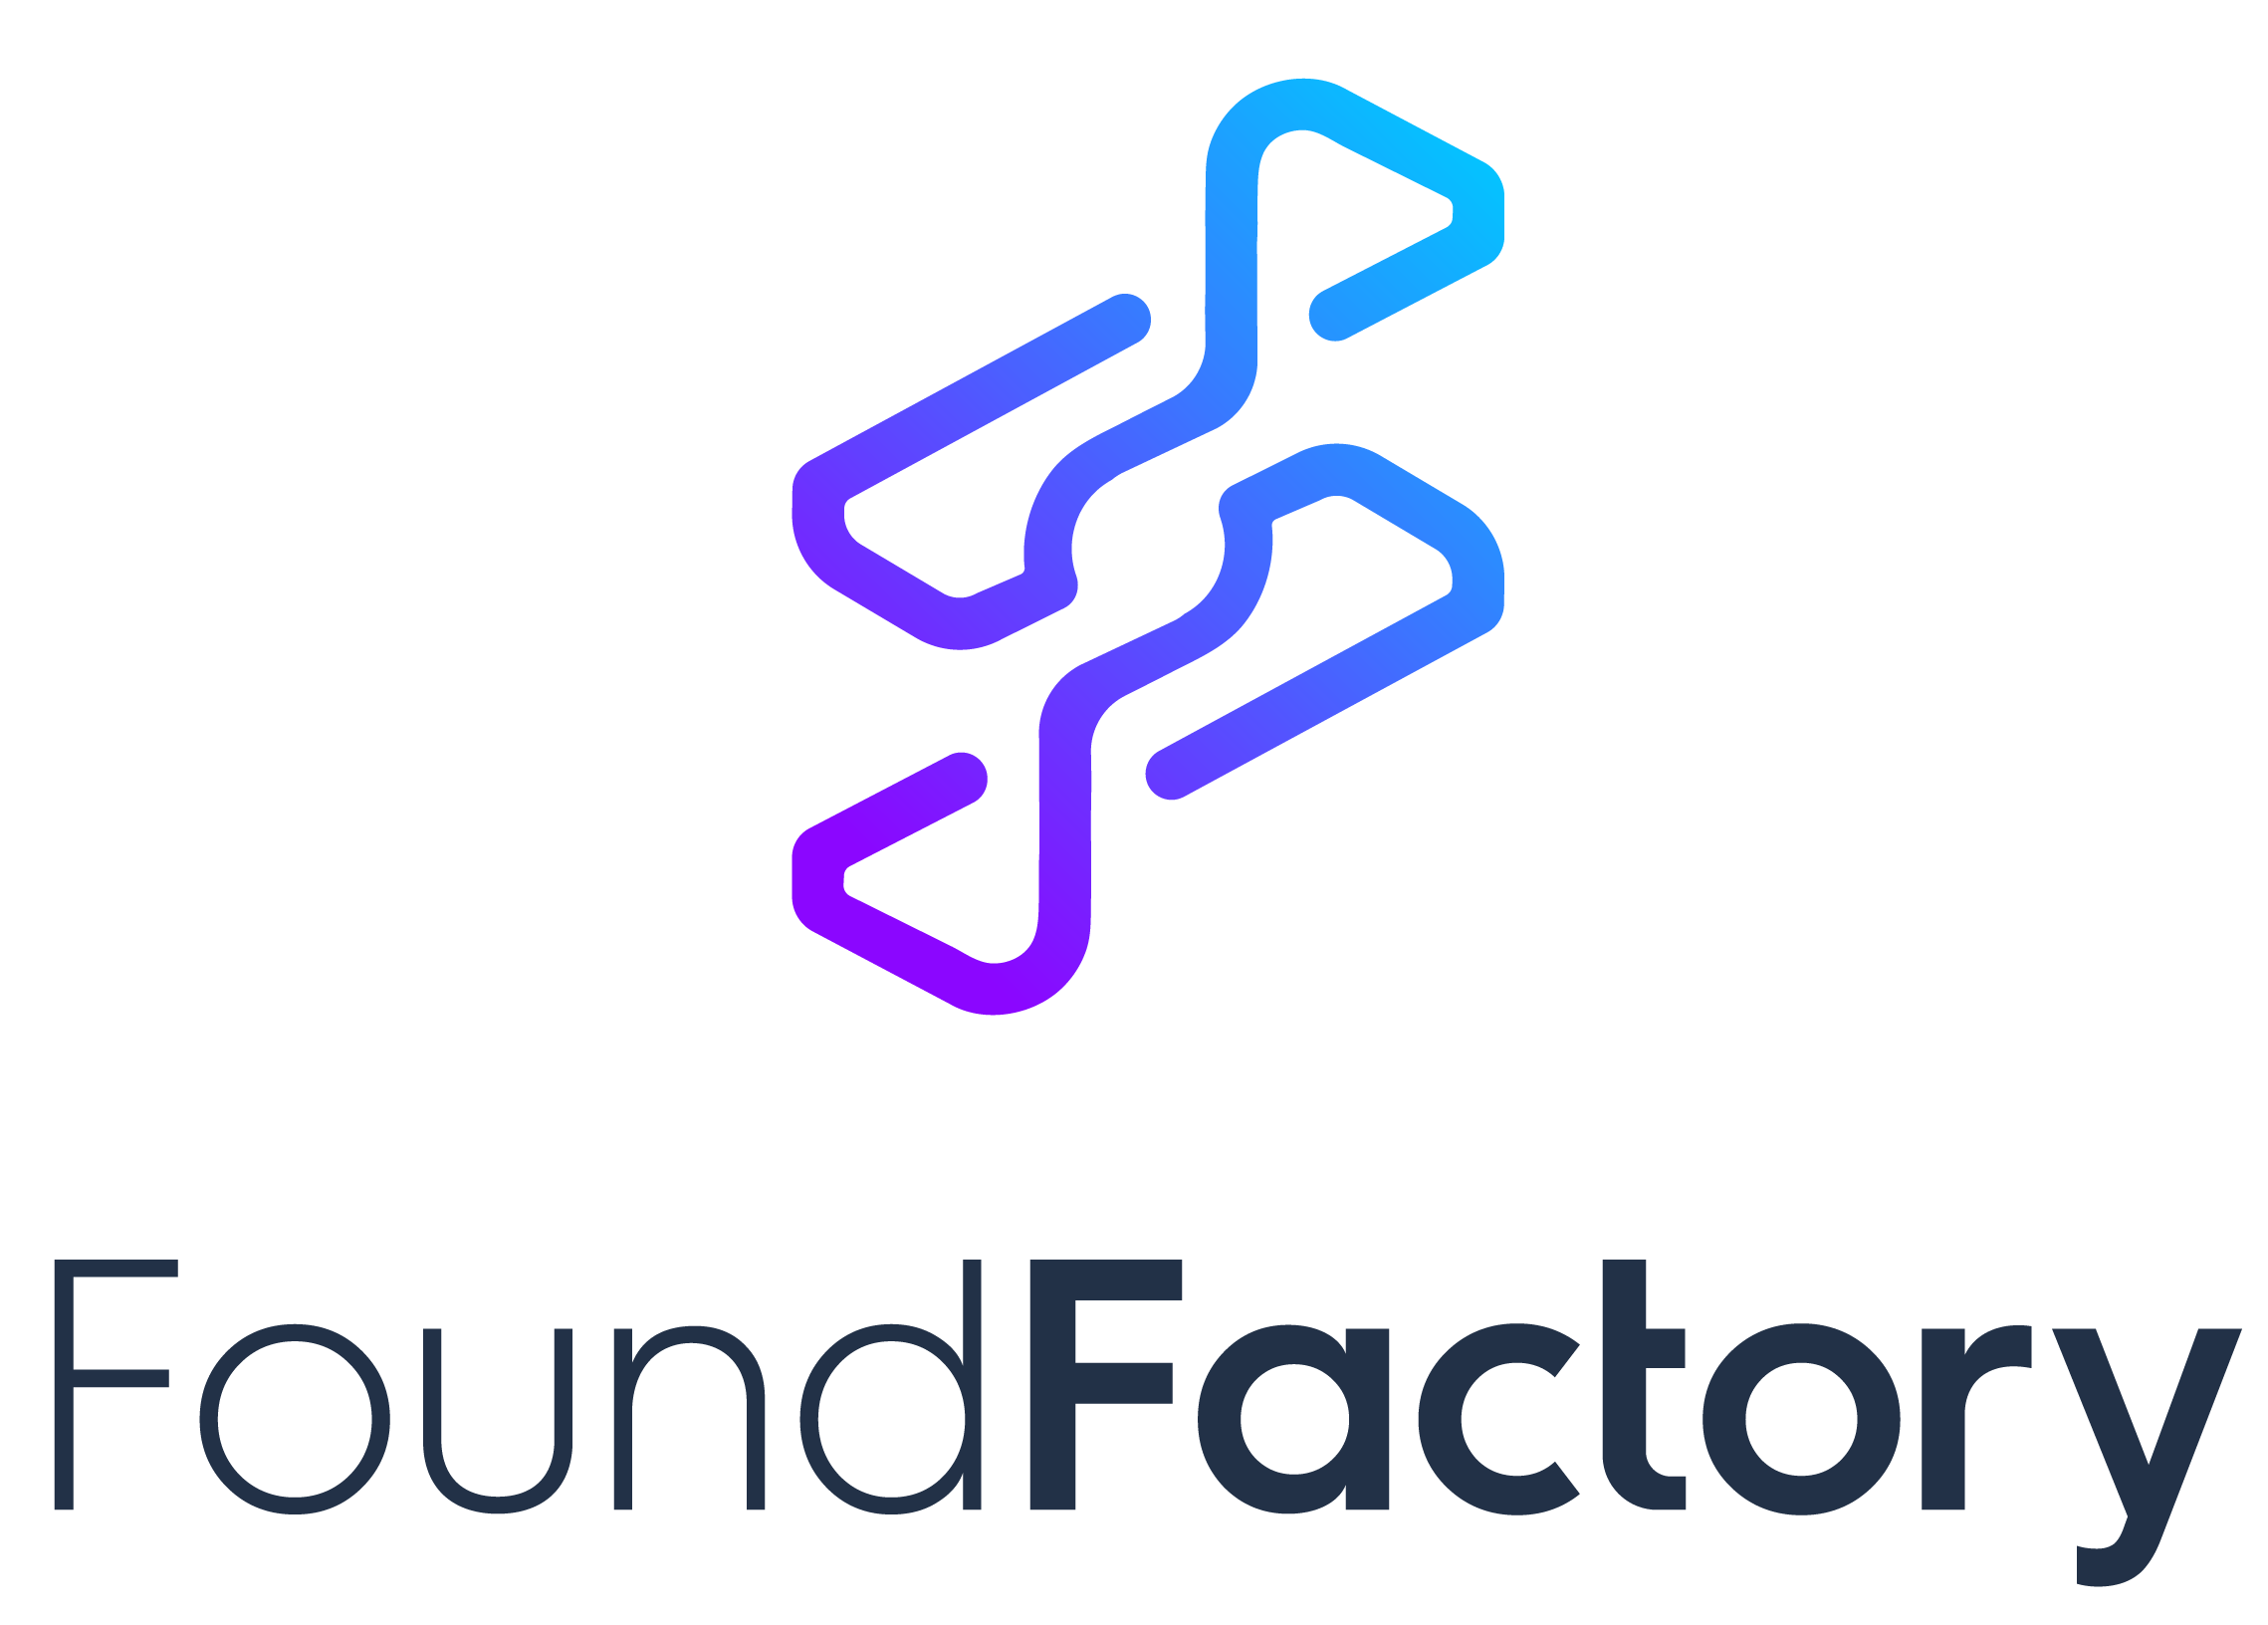 FoundFactory